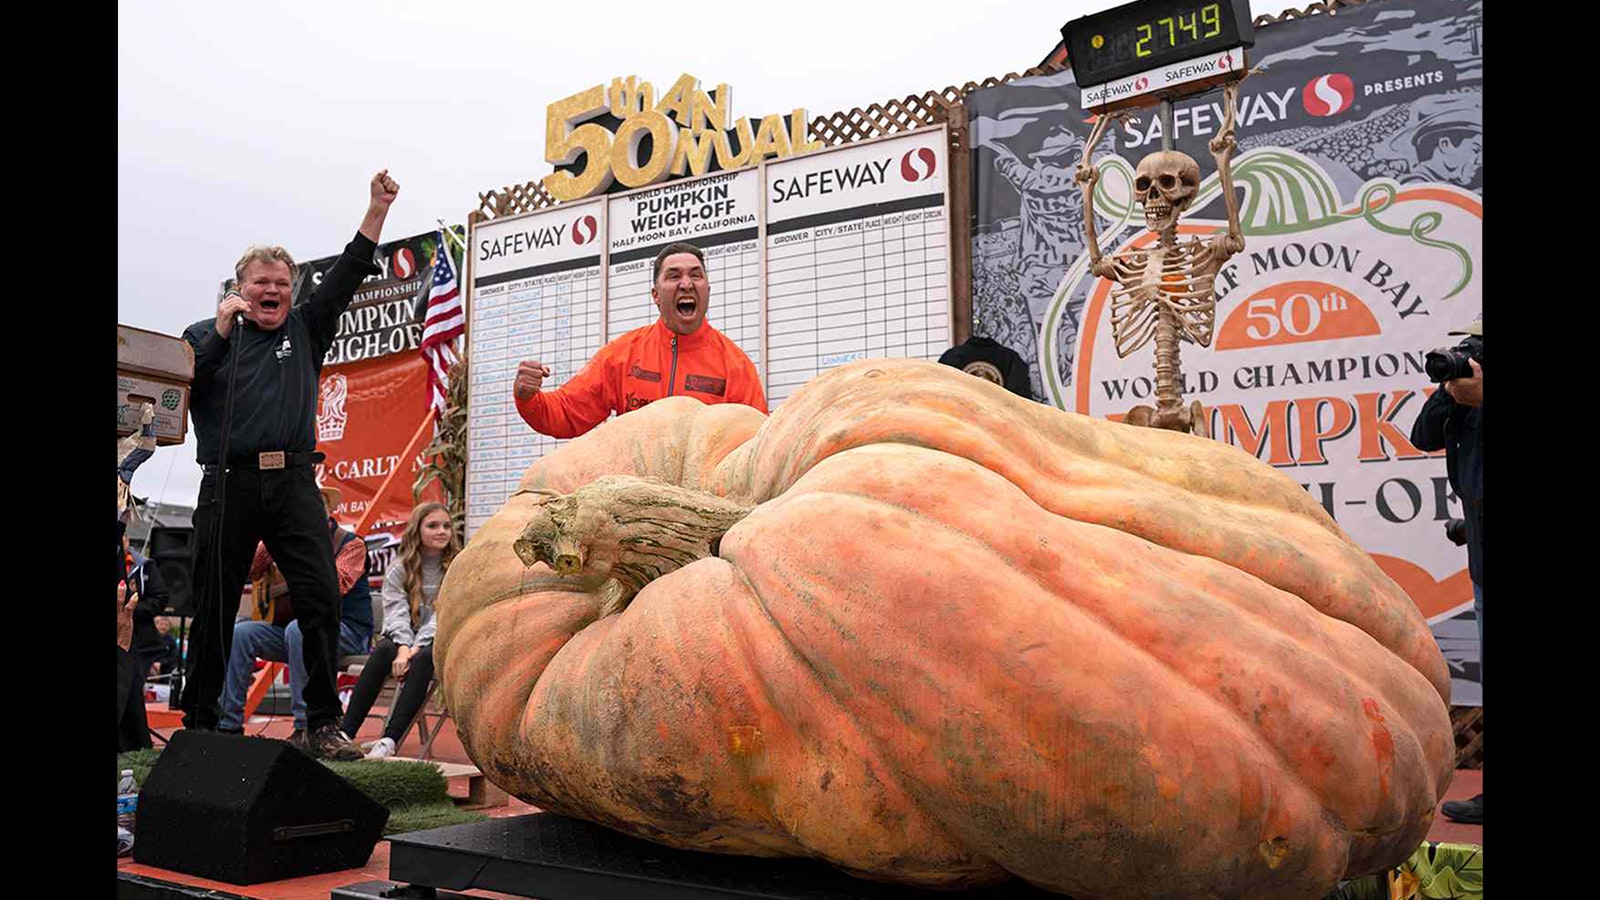 Travis Gienger of Minnesota reacts after his pumpkin weighed in at a world-record 2,749 pounds at Monday's world championship weigh-off in Half Moon Bay, California.